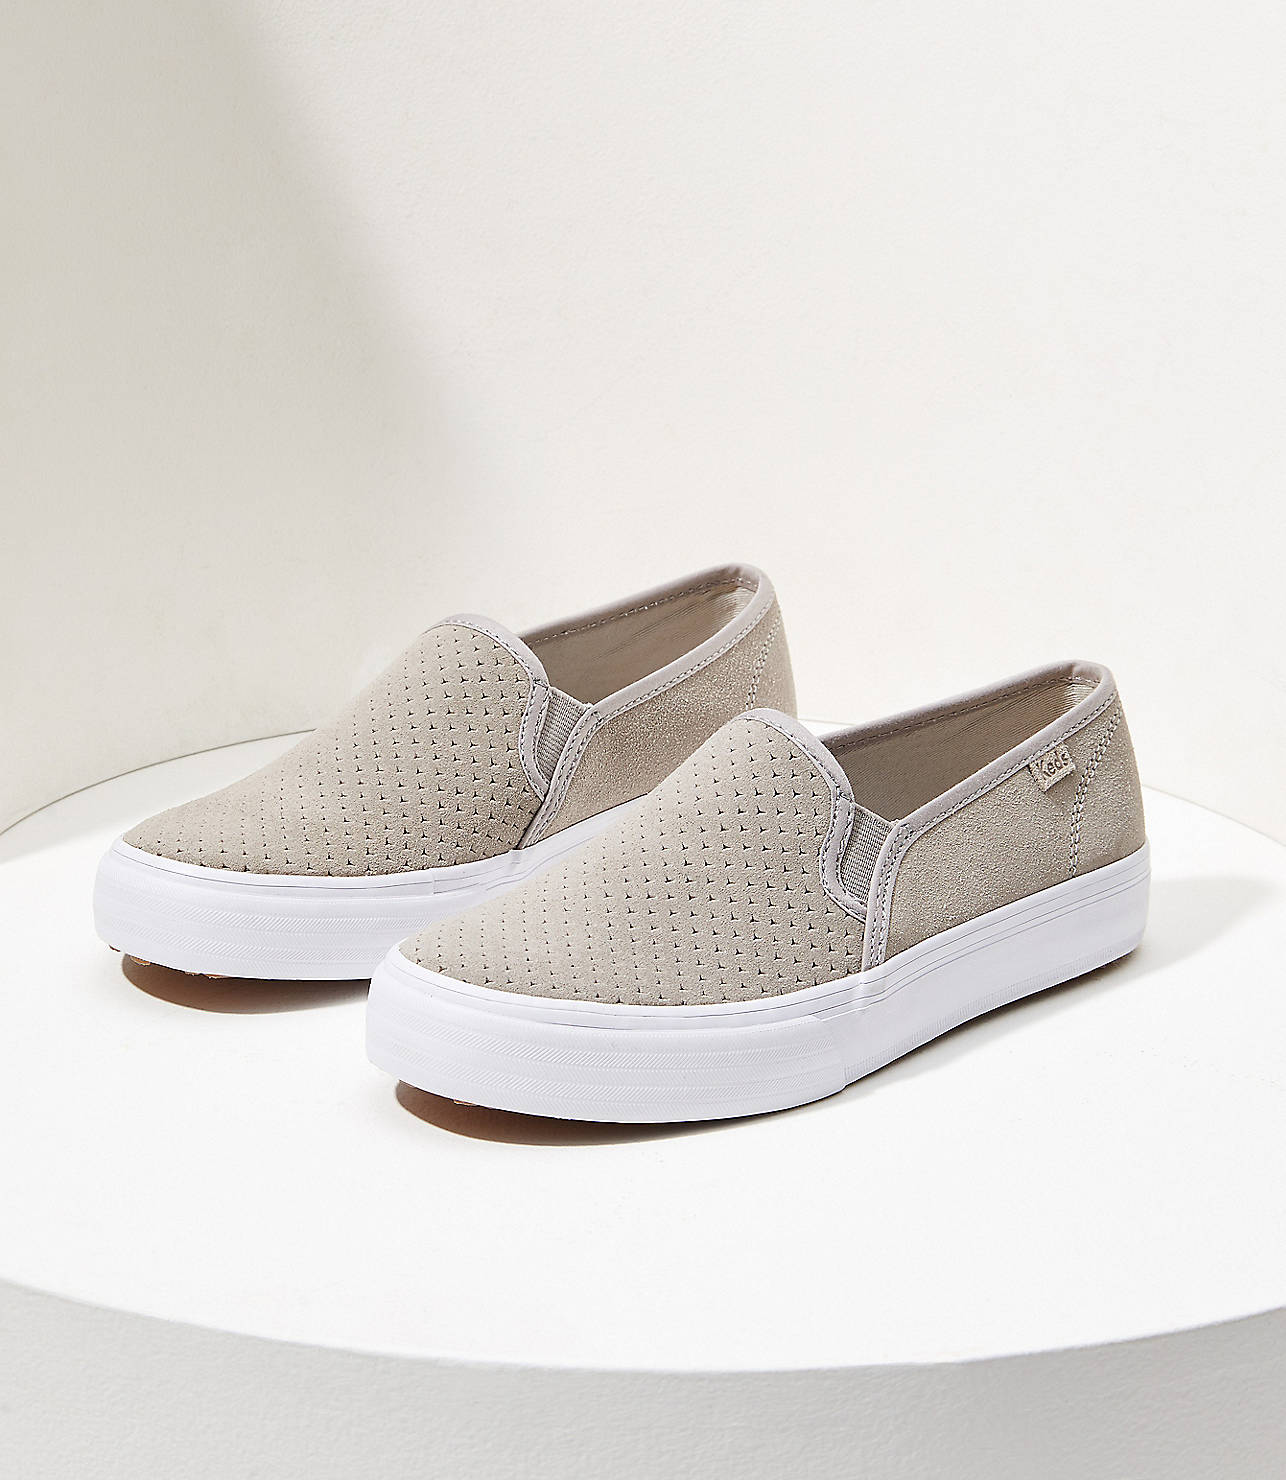 Keds Double Decker Perforated Suede Sneakers